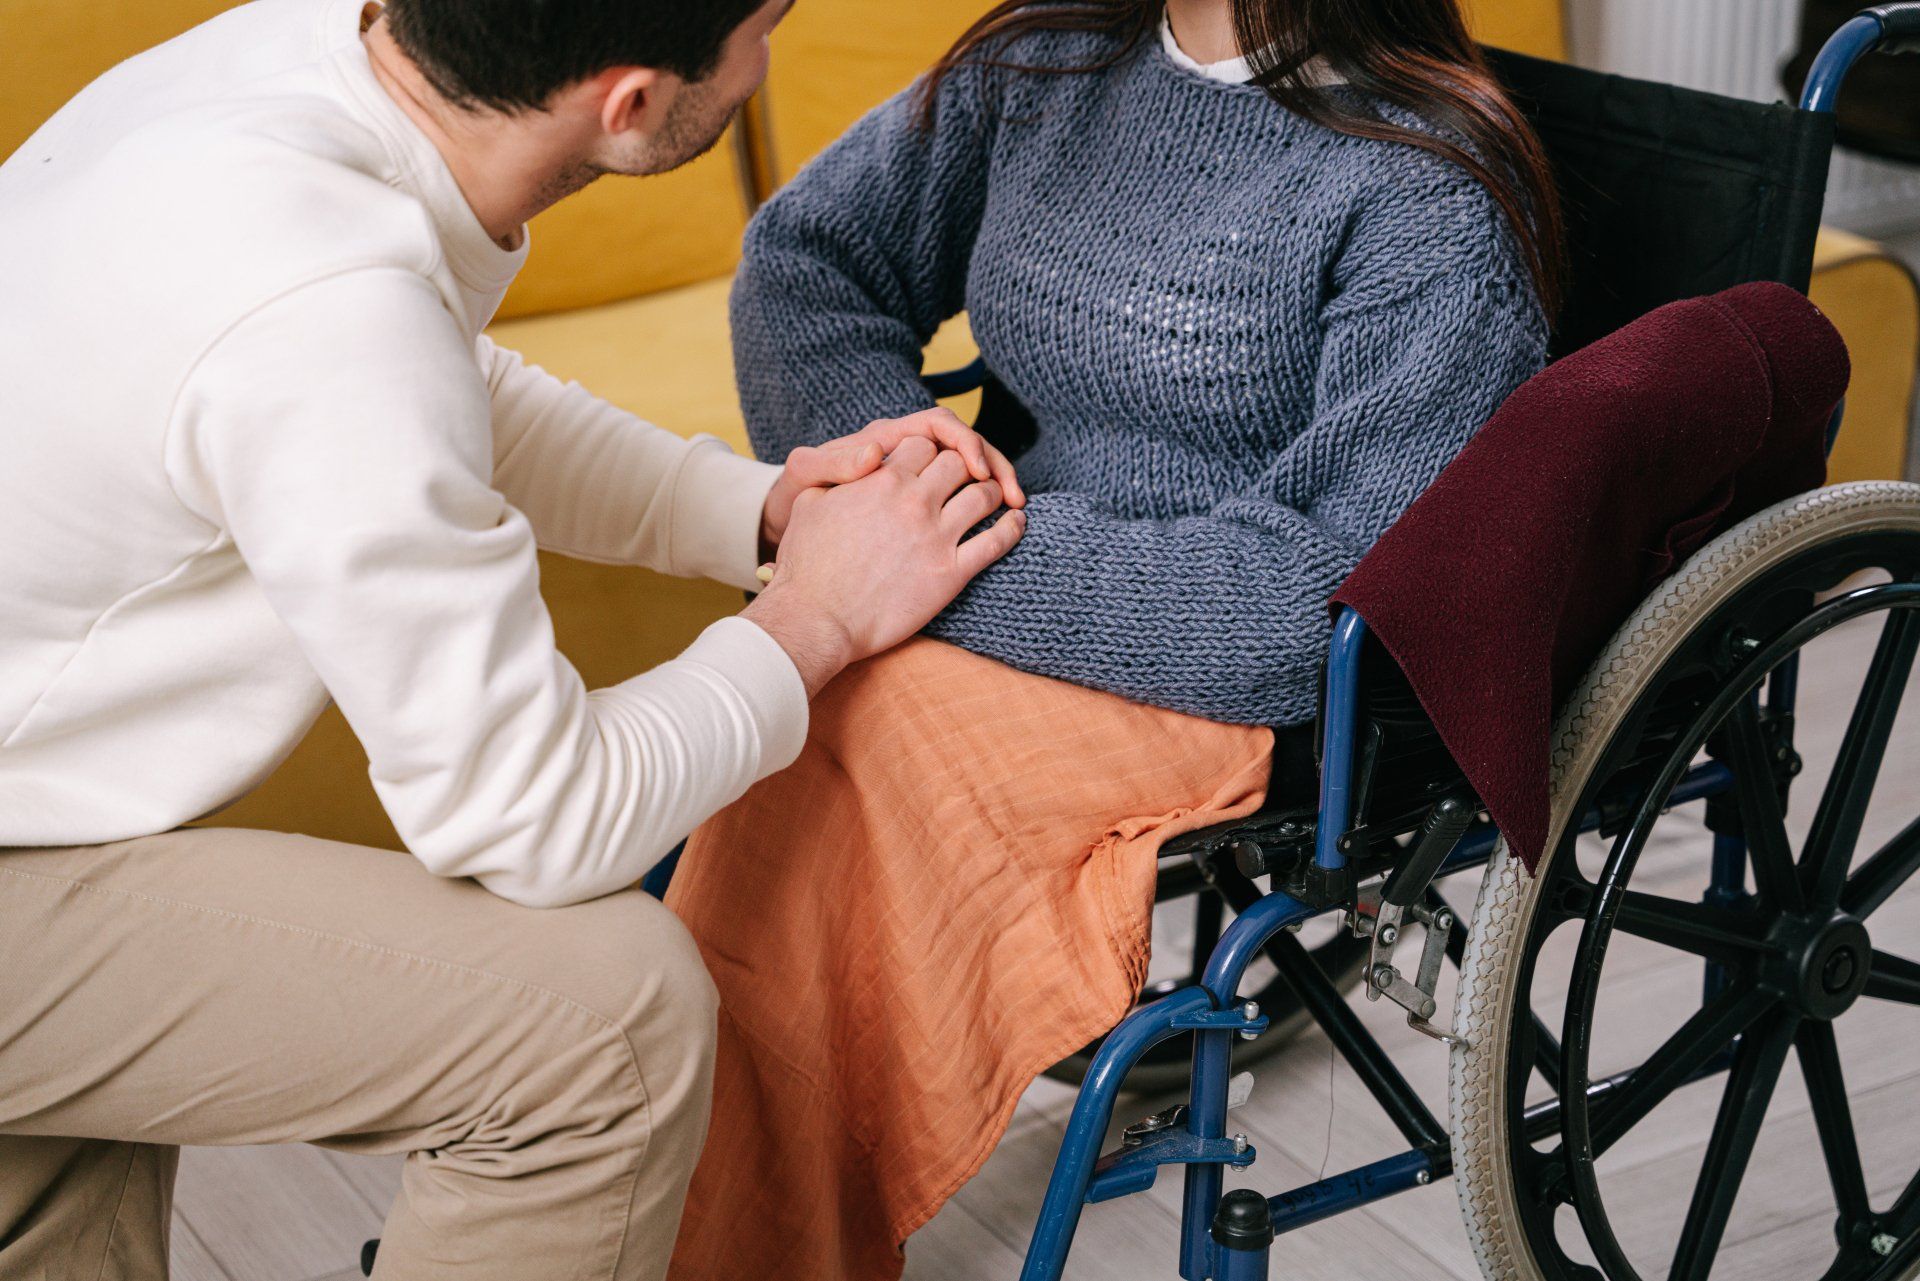 man and woman holding hands, women is in a wheelchair